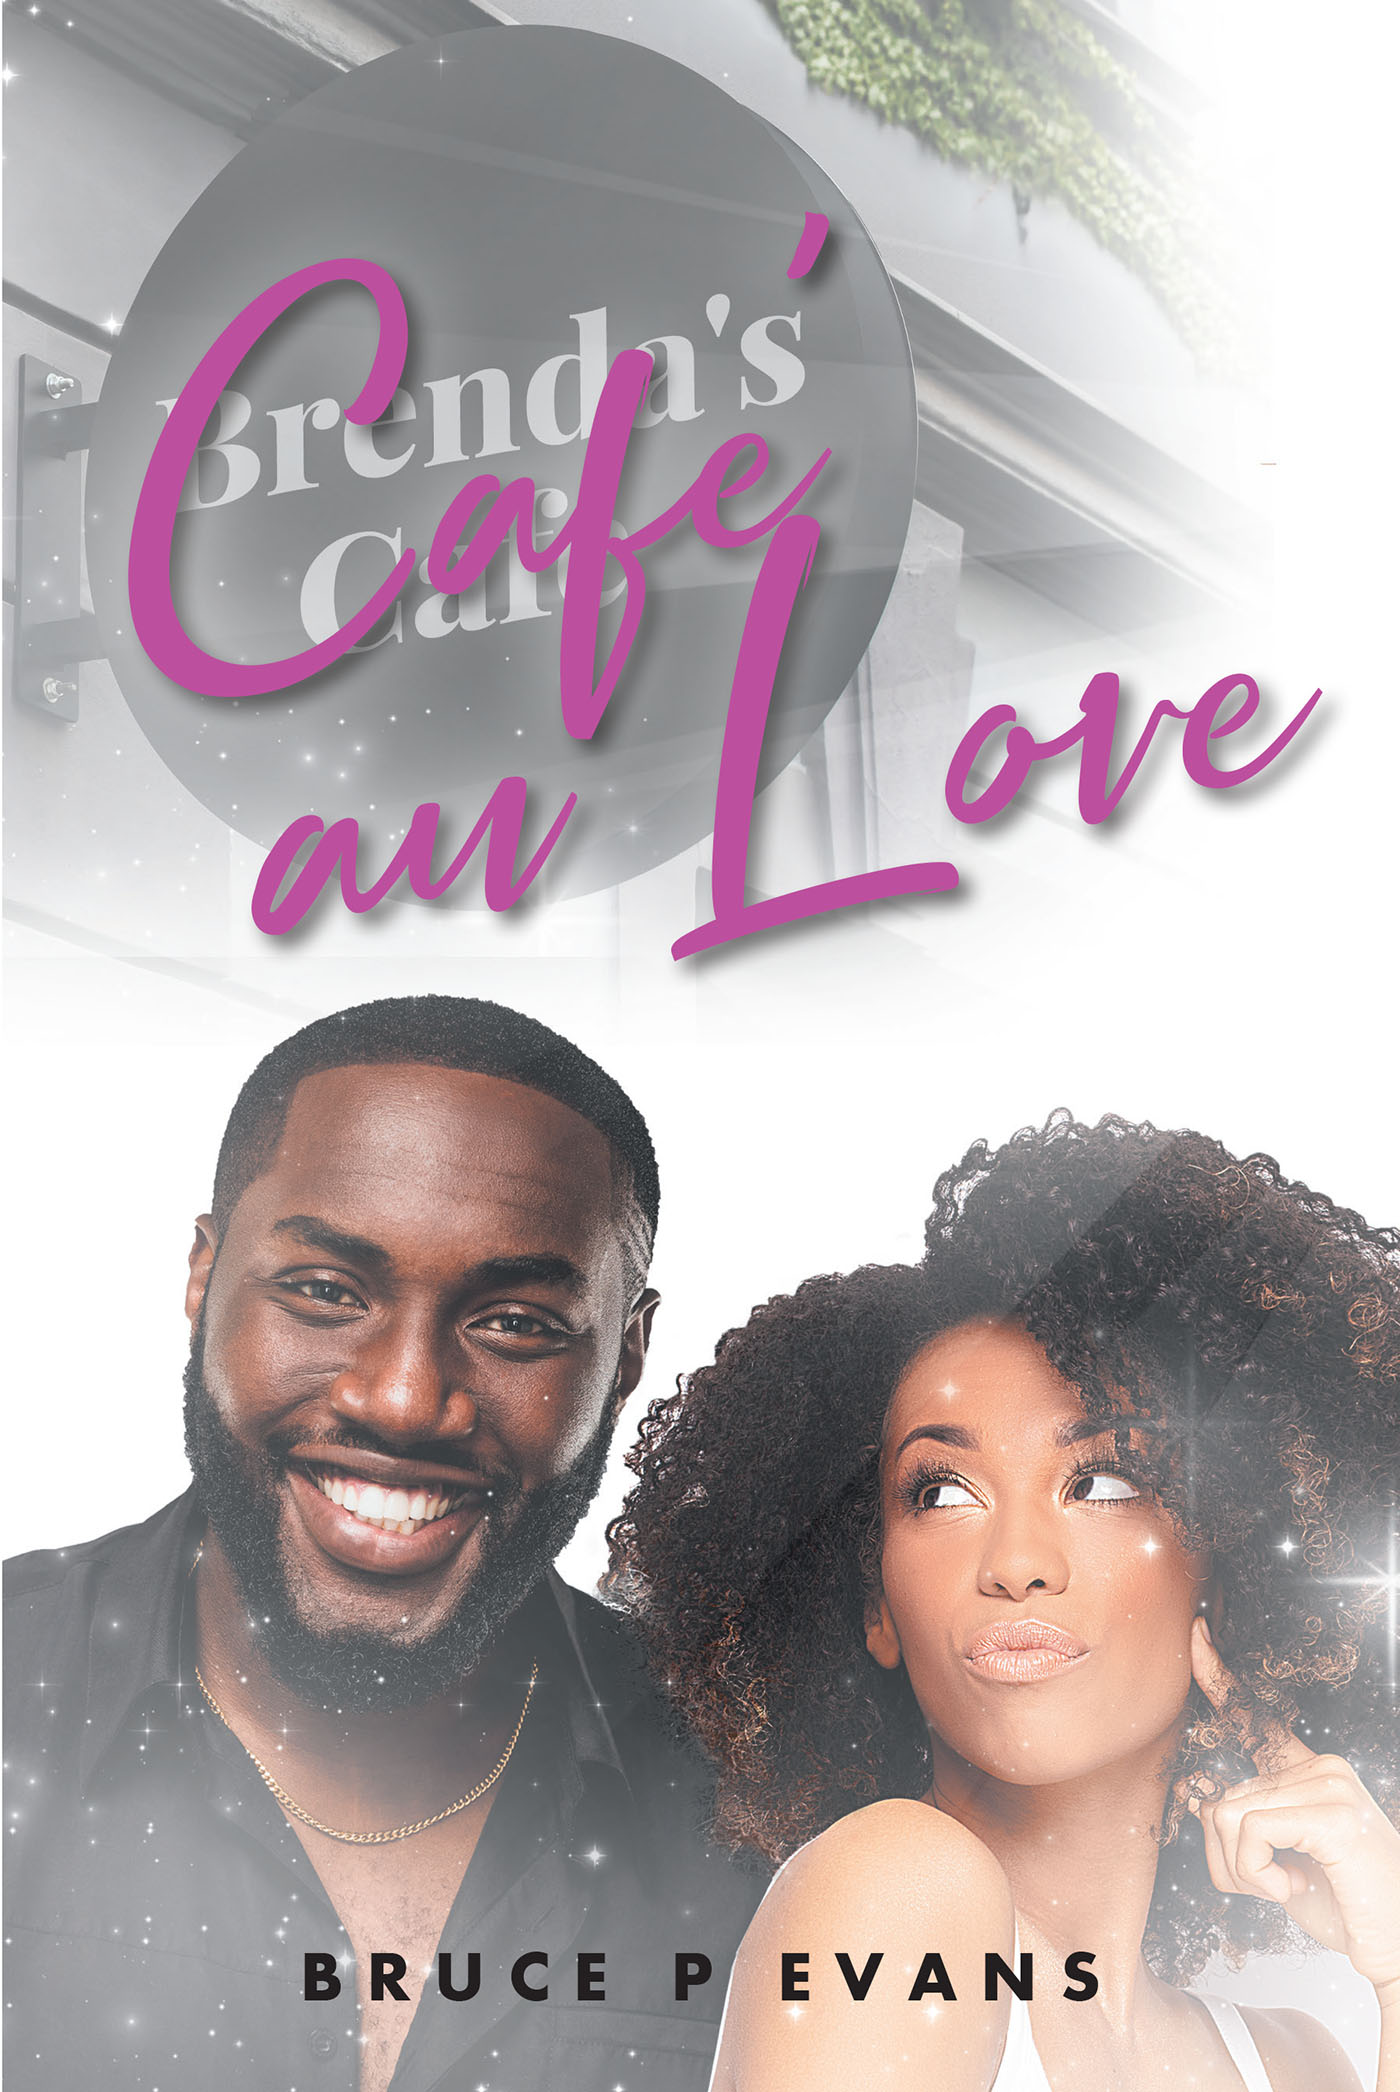 Bruce P. Evans’s Newly Released “Café au Love” is a Charming Romantic Comedy That Will Tug at the Heartstrings and Entertain the Imagination